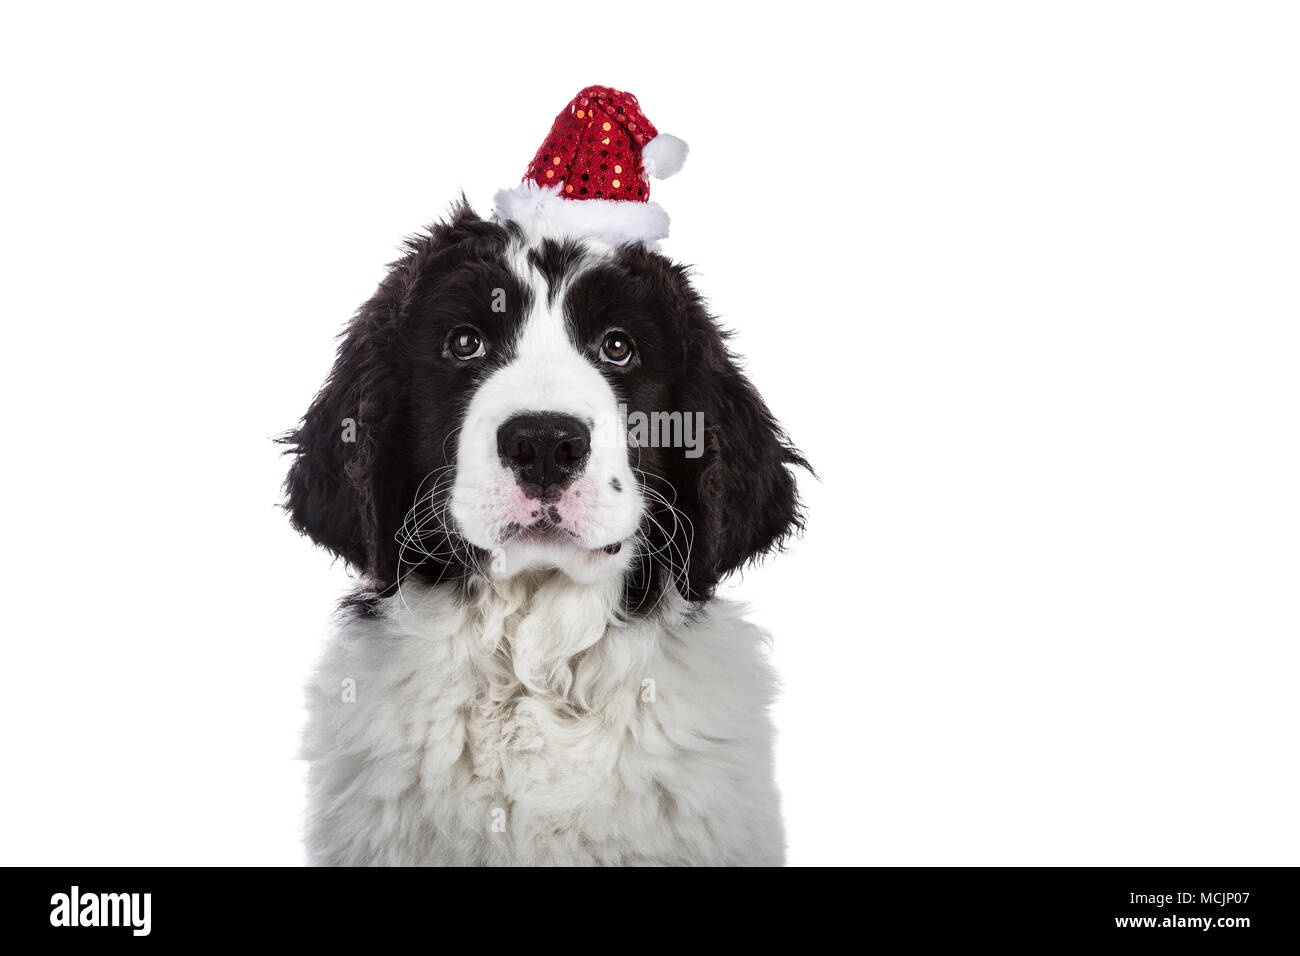 Head shot of black and white Landseer puppy dog wearing cute little Christmas hat while looking into the camera isolated on white background Stock Photo